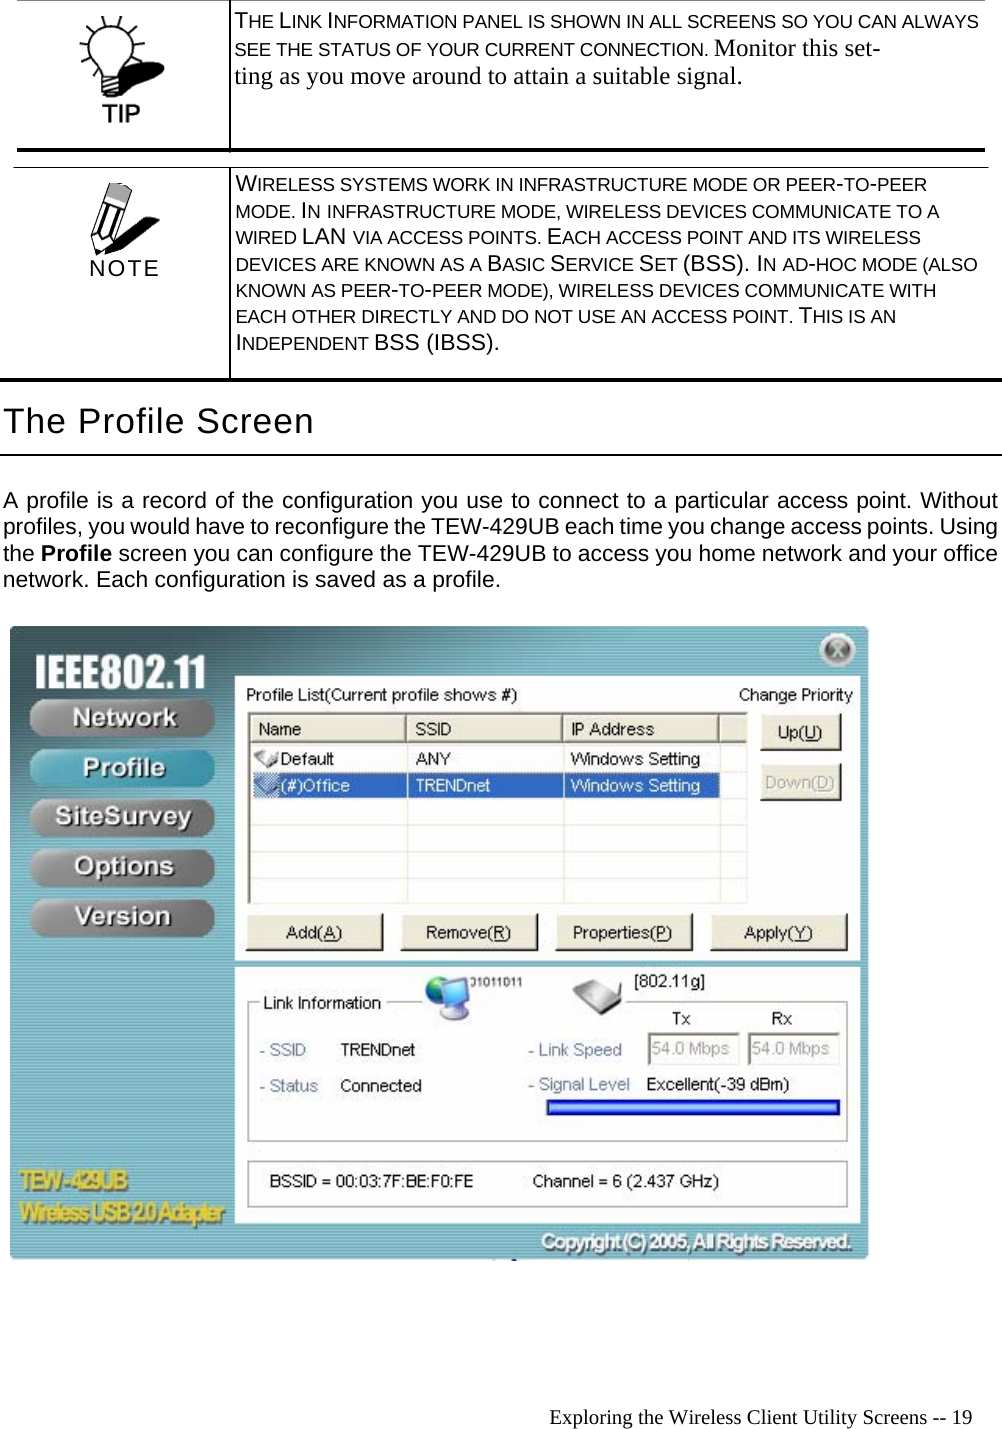   Exploring the Wireless Client Utility Screens -- 19  THE LINK INFORMATION PANEL IS SHOWN IN ALL SCREENS SO YOU CAN ALWAYS SEE THE STATUS OF YOUR CURRENT CONNECTION. Monitor this set- ting as you move around to attain a suitable signal. The Profile Screen A profile is a record of the configuration you use to connect to a particular access point. Without profiles, you would have to reconfigure the TEW-429UB each time you change access points. Using the Profile screen you can configure the TEW-429UB to access you home network and your office network. Each configuration is saved as a profile.    WIRELESS SYSTEMS WORK IN INFRASTRUCTURE MODE OR PEER-TO-PEER MODE. IN INFRASTRUCTURE MODE, WIRELESS DEVICES COMMUNICATE TO A WIRED LAN VIA ACCESS POINTS. EACH ACCESS POINT AND ITS WIRELESS DEVICES ARE KNOWN AS A BASIC SERVICE SET (BSS). IN AD-HOC MODE (ALSO KNOWN AS PEER-TO-PEER MODE), WIRELESS DEVICES COMMUNICATE WITH EACH OTHER DIRECTLY AND DO NOT USE AN ACCESS POINT. THIS IS AN INDEPENDENT BSS (IBSS).  NOTE 